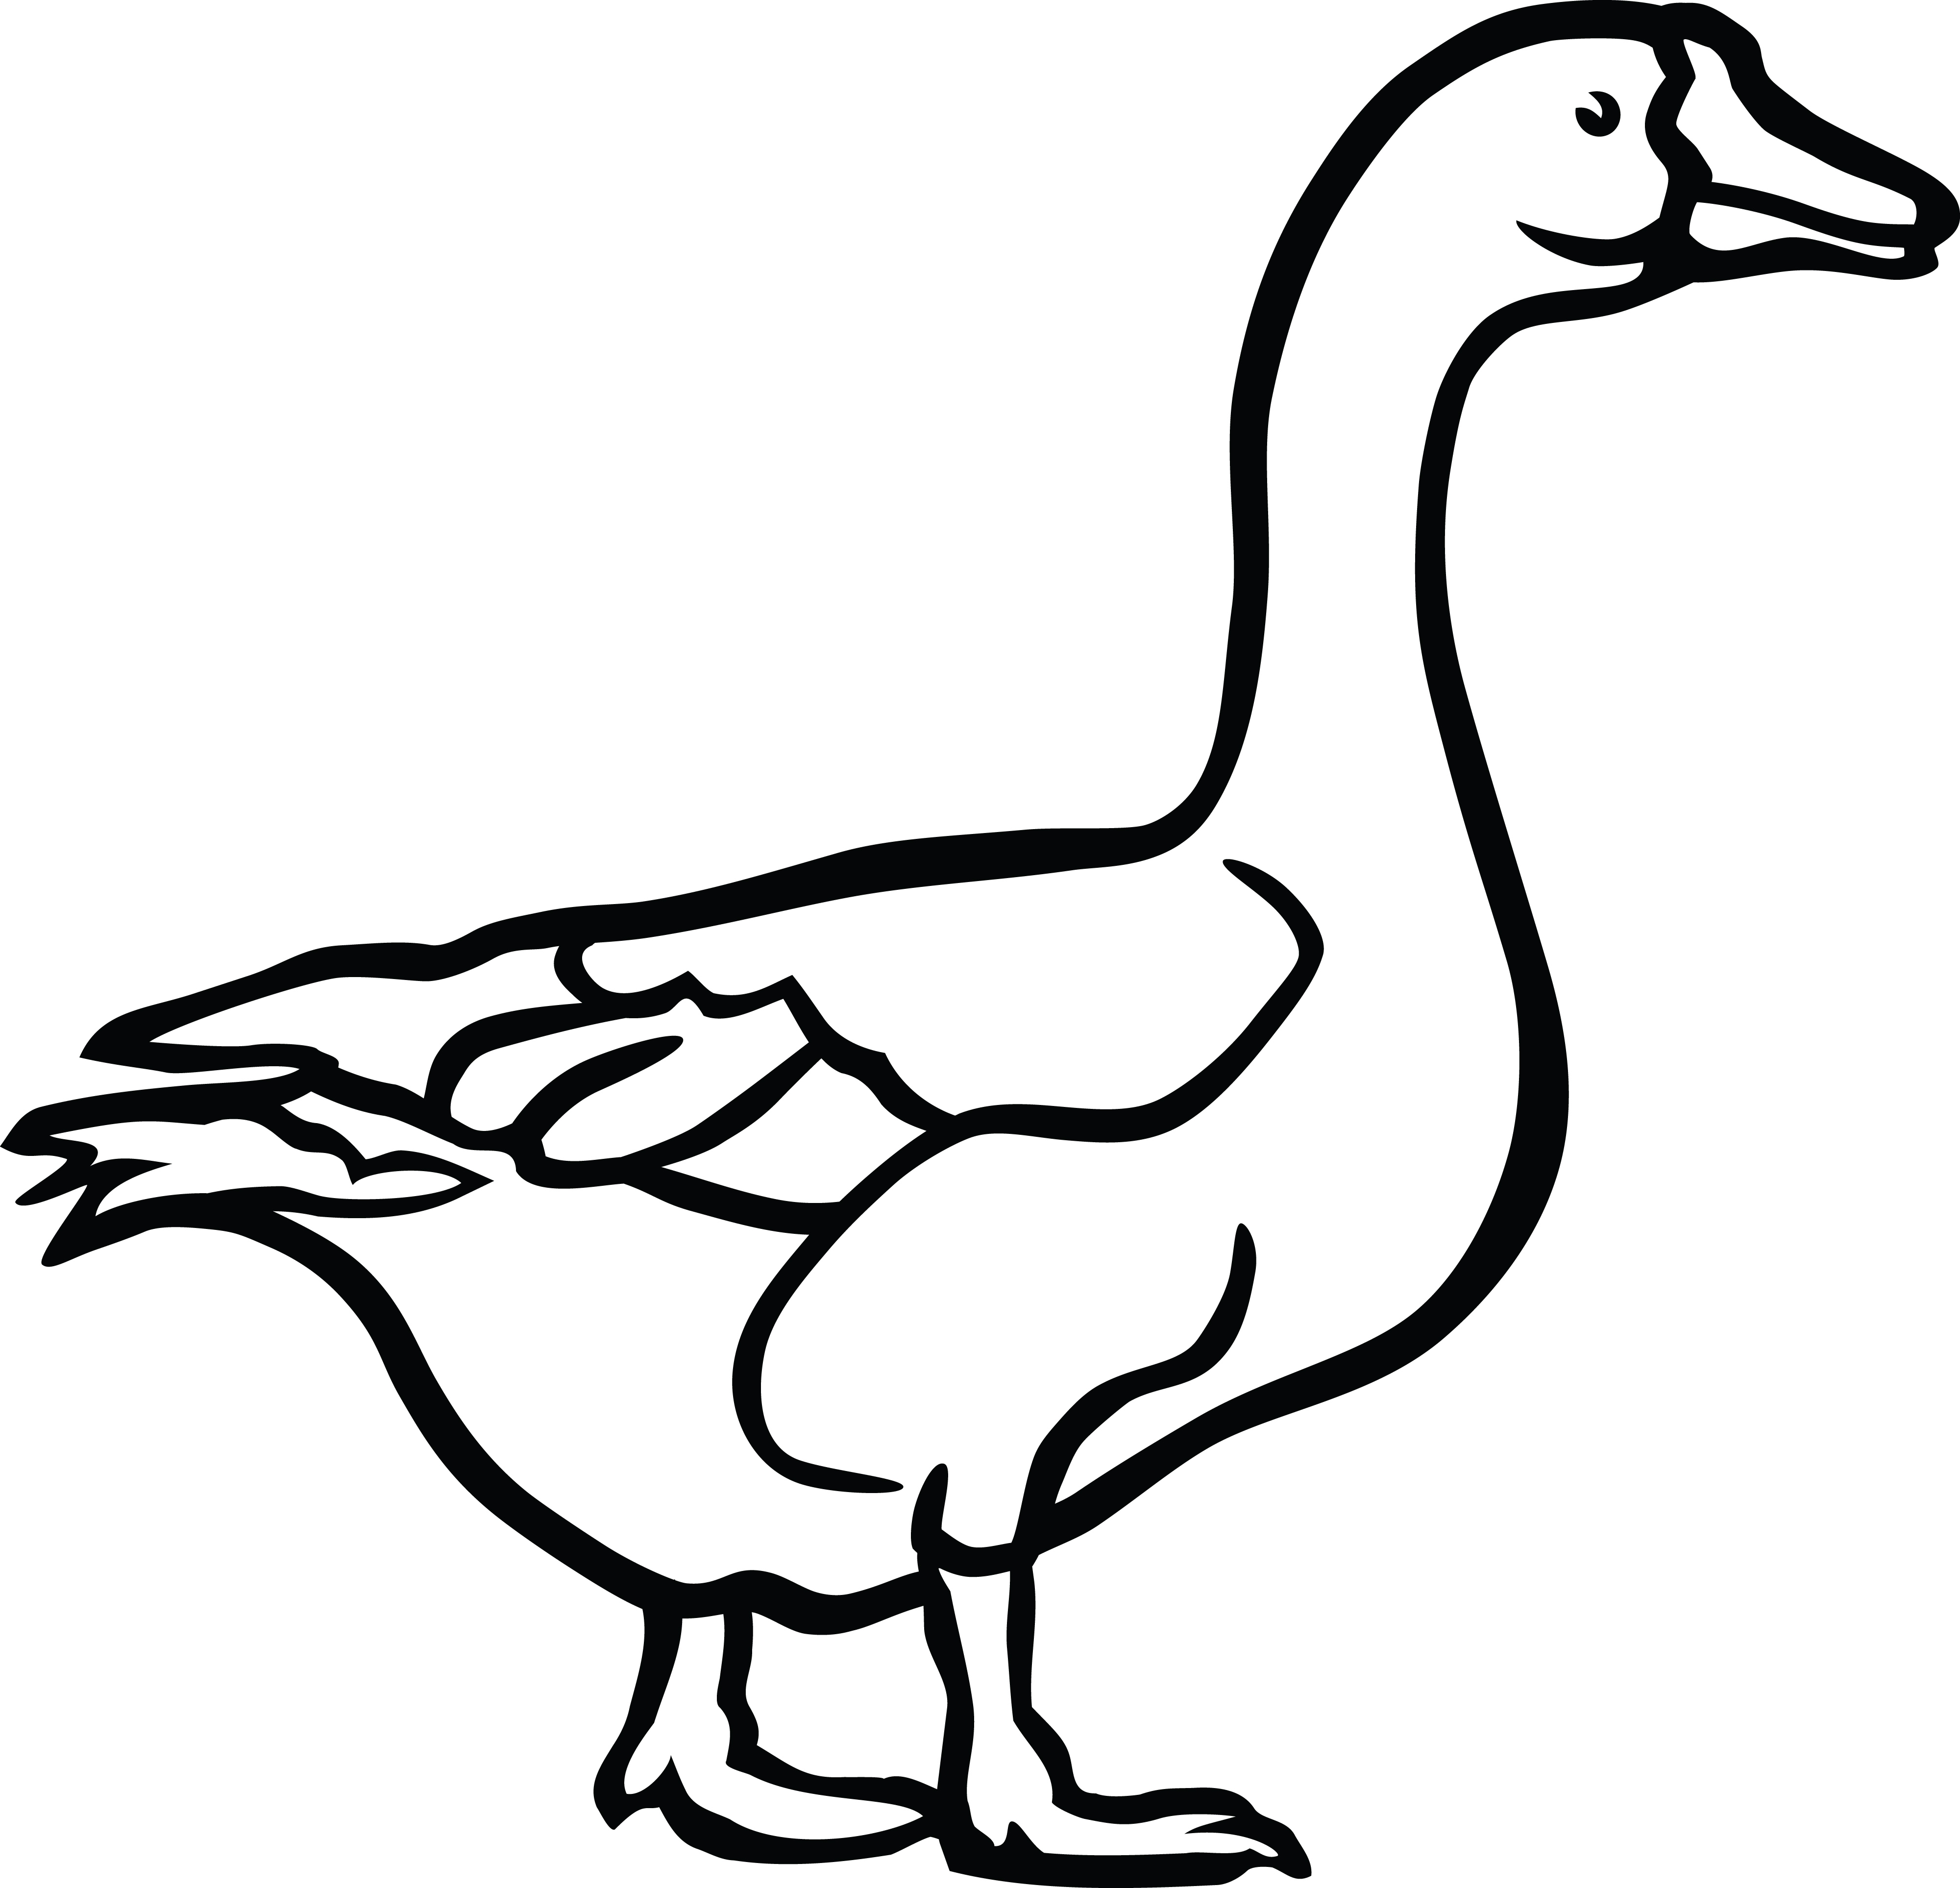 873 Goose free clipart.